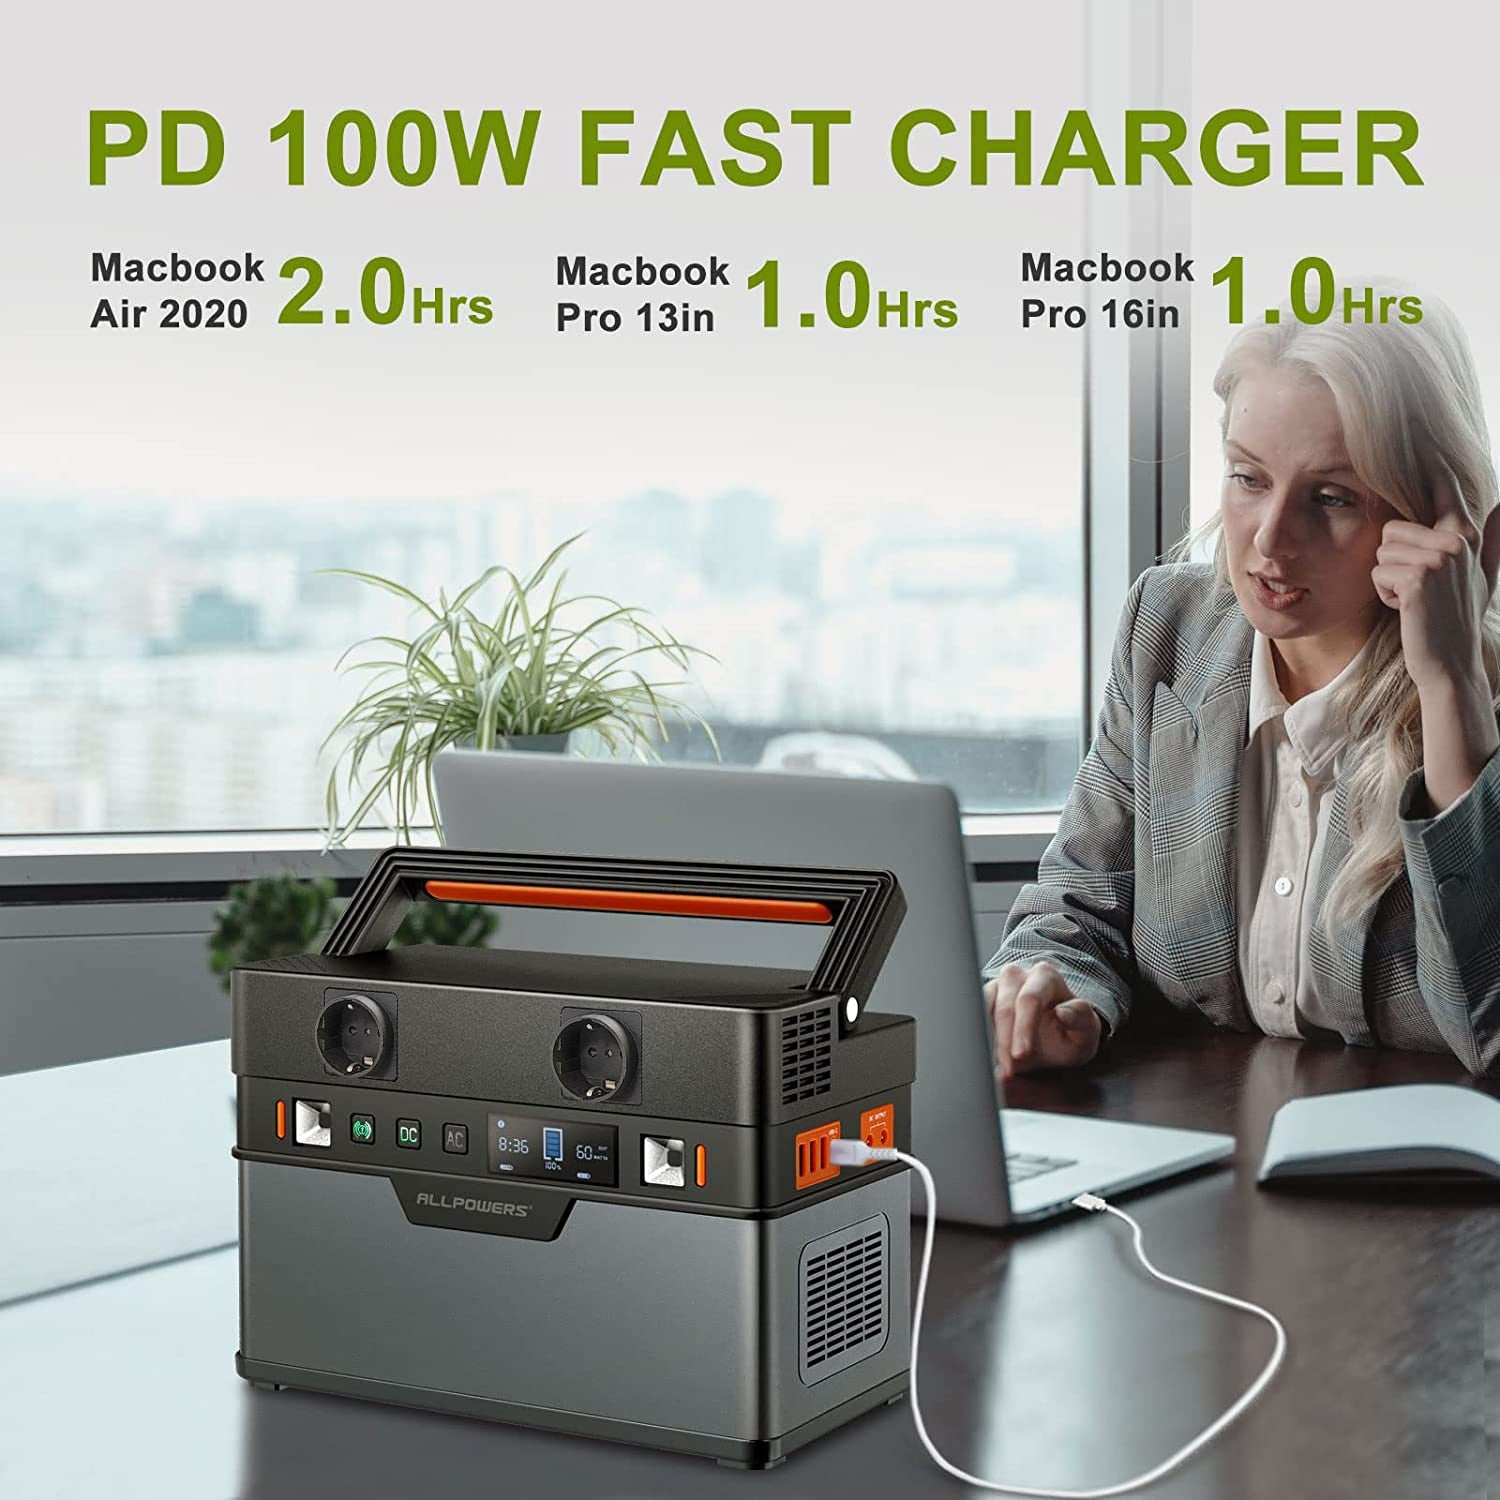 PD 100w FAST CHARGER Macbook Macbook Air